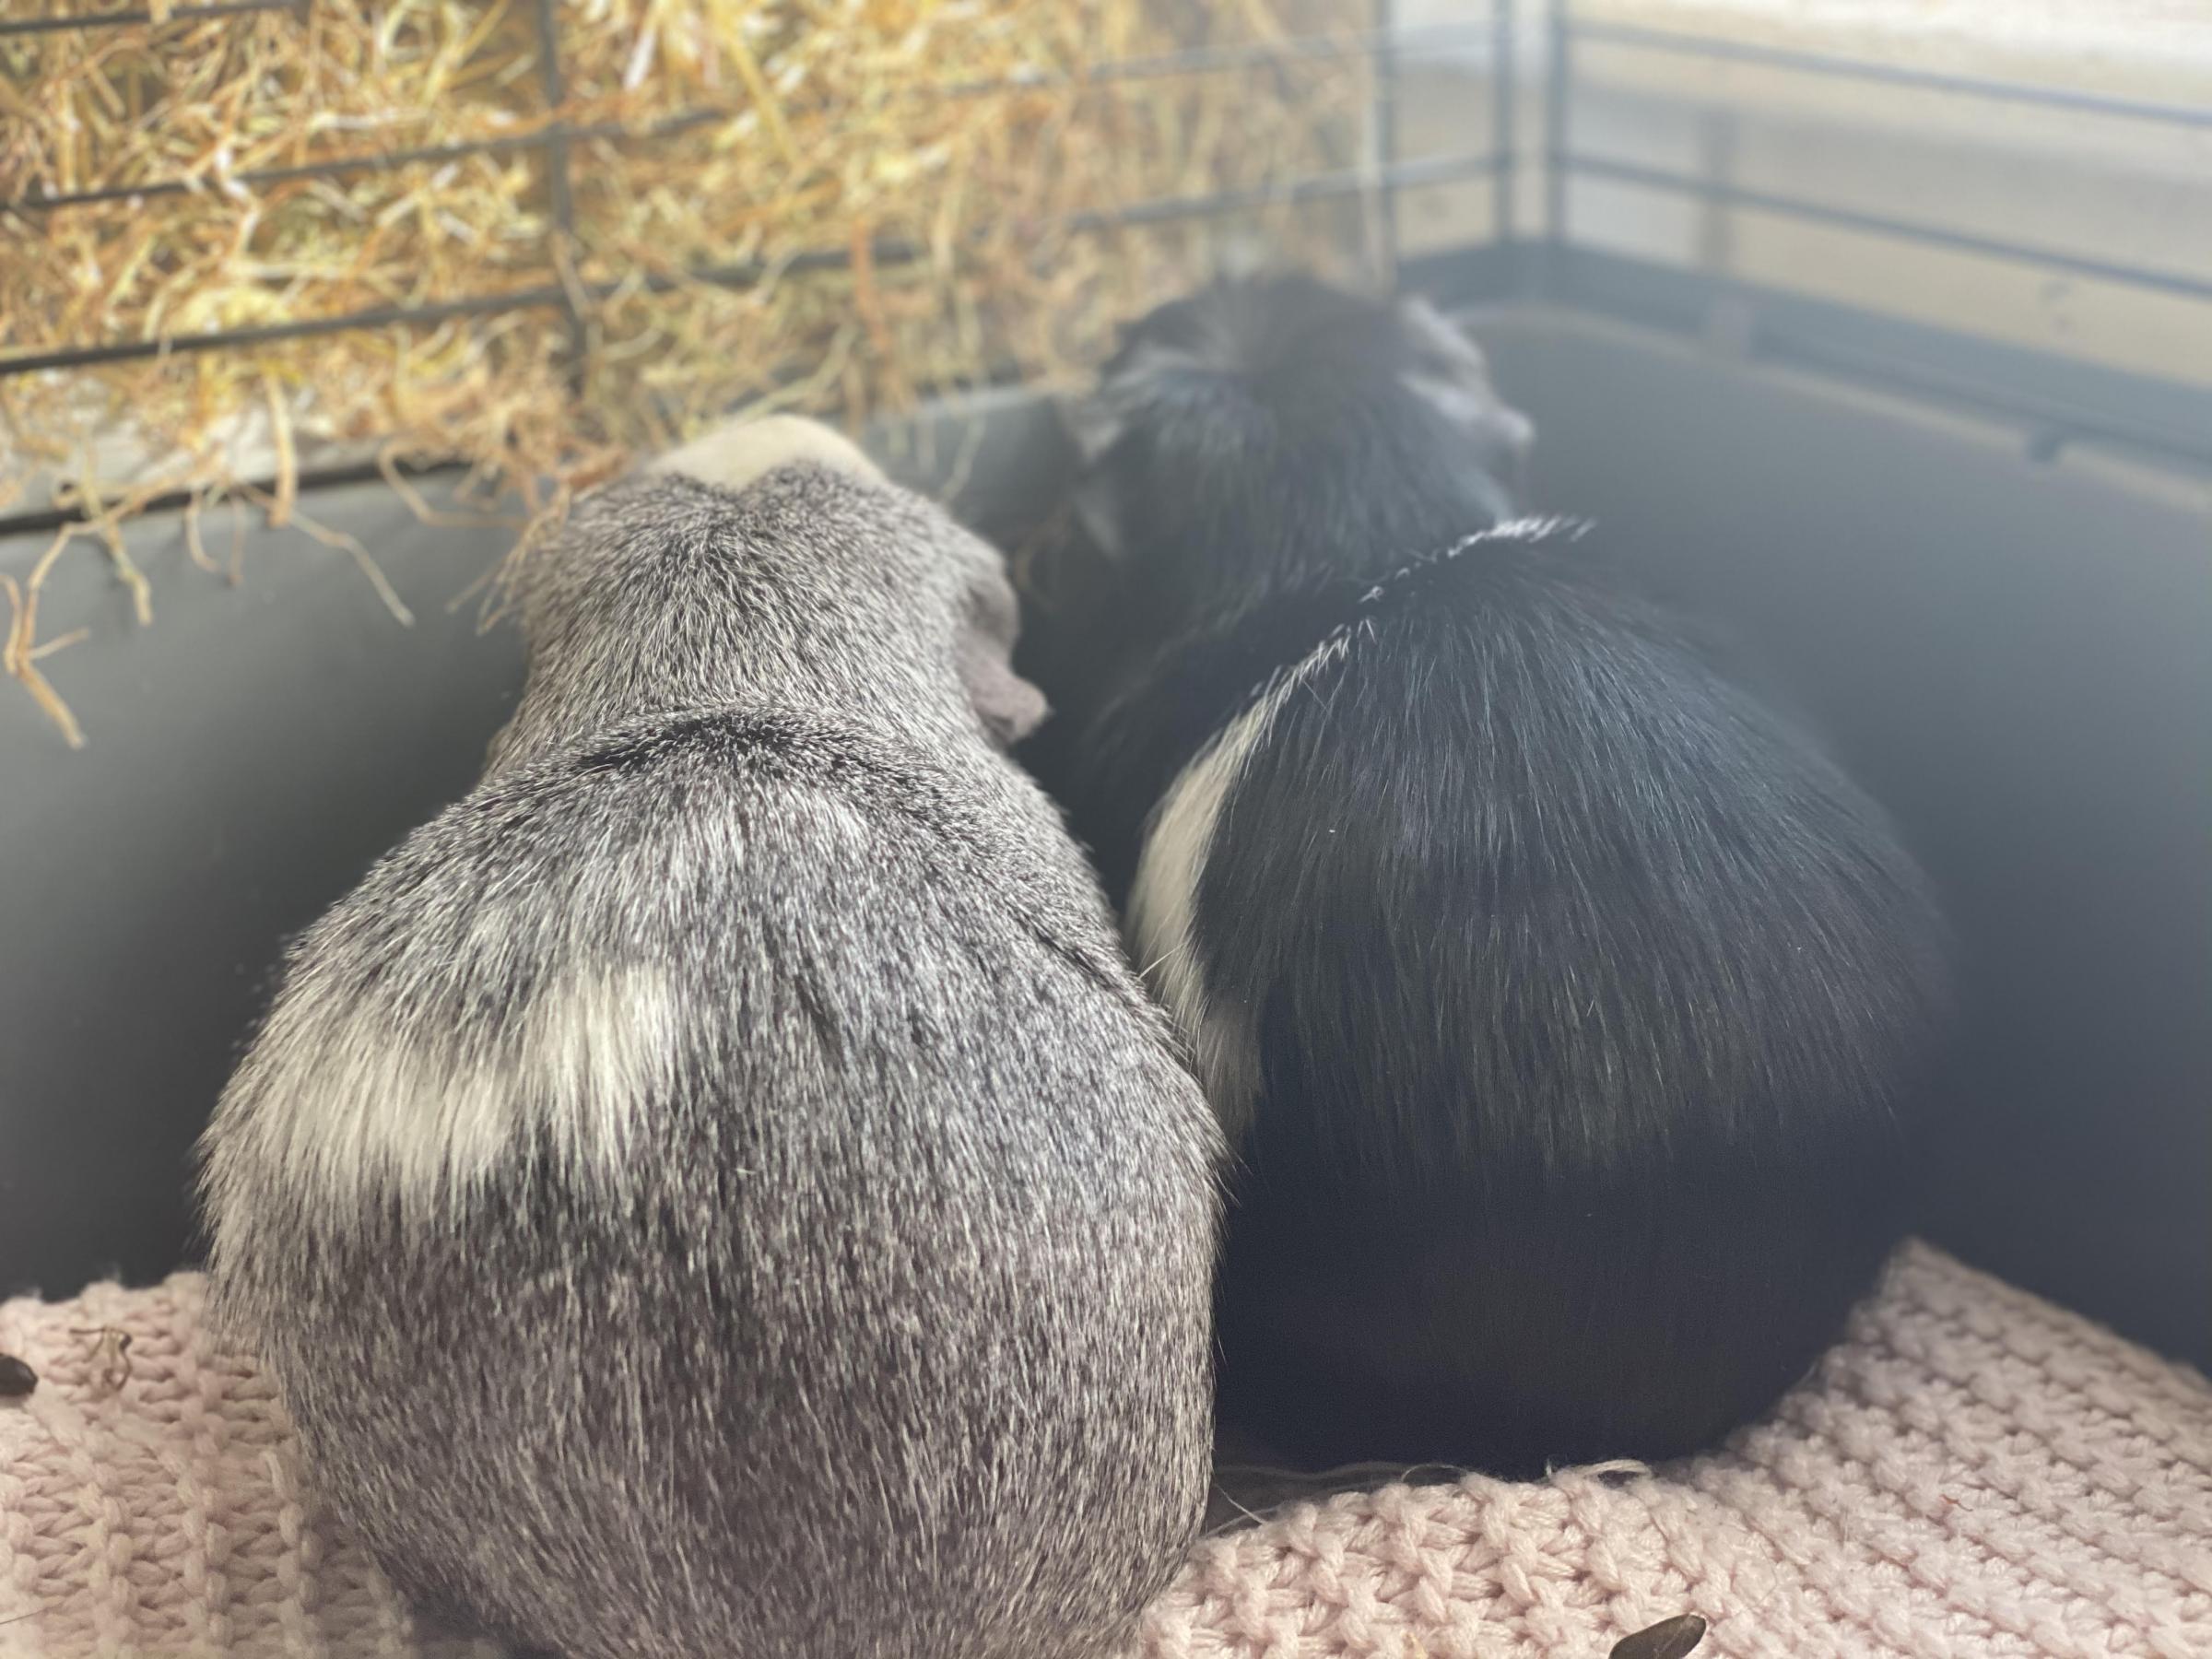 RSPCA looking to rehome blind guinea pig and sister who guides her